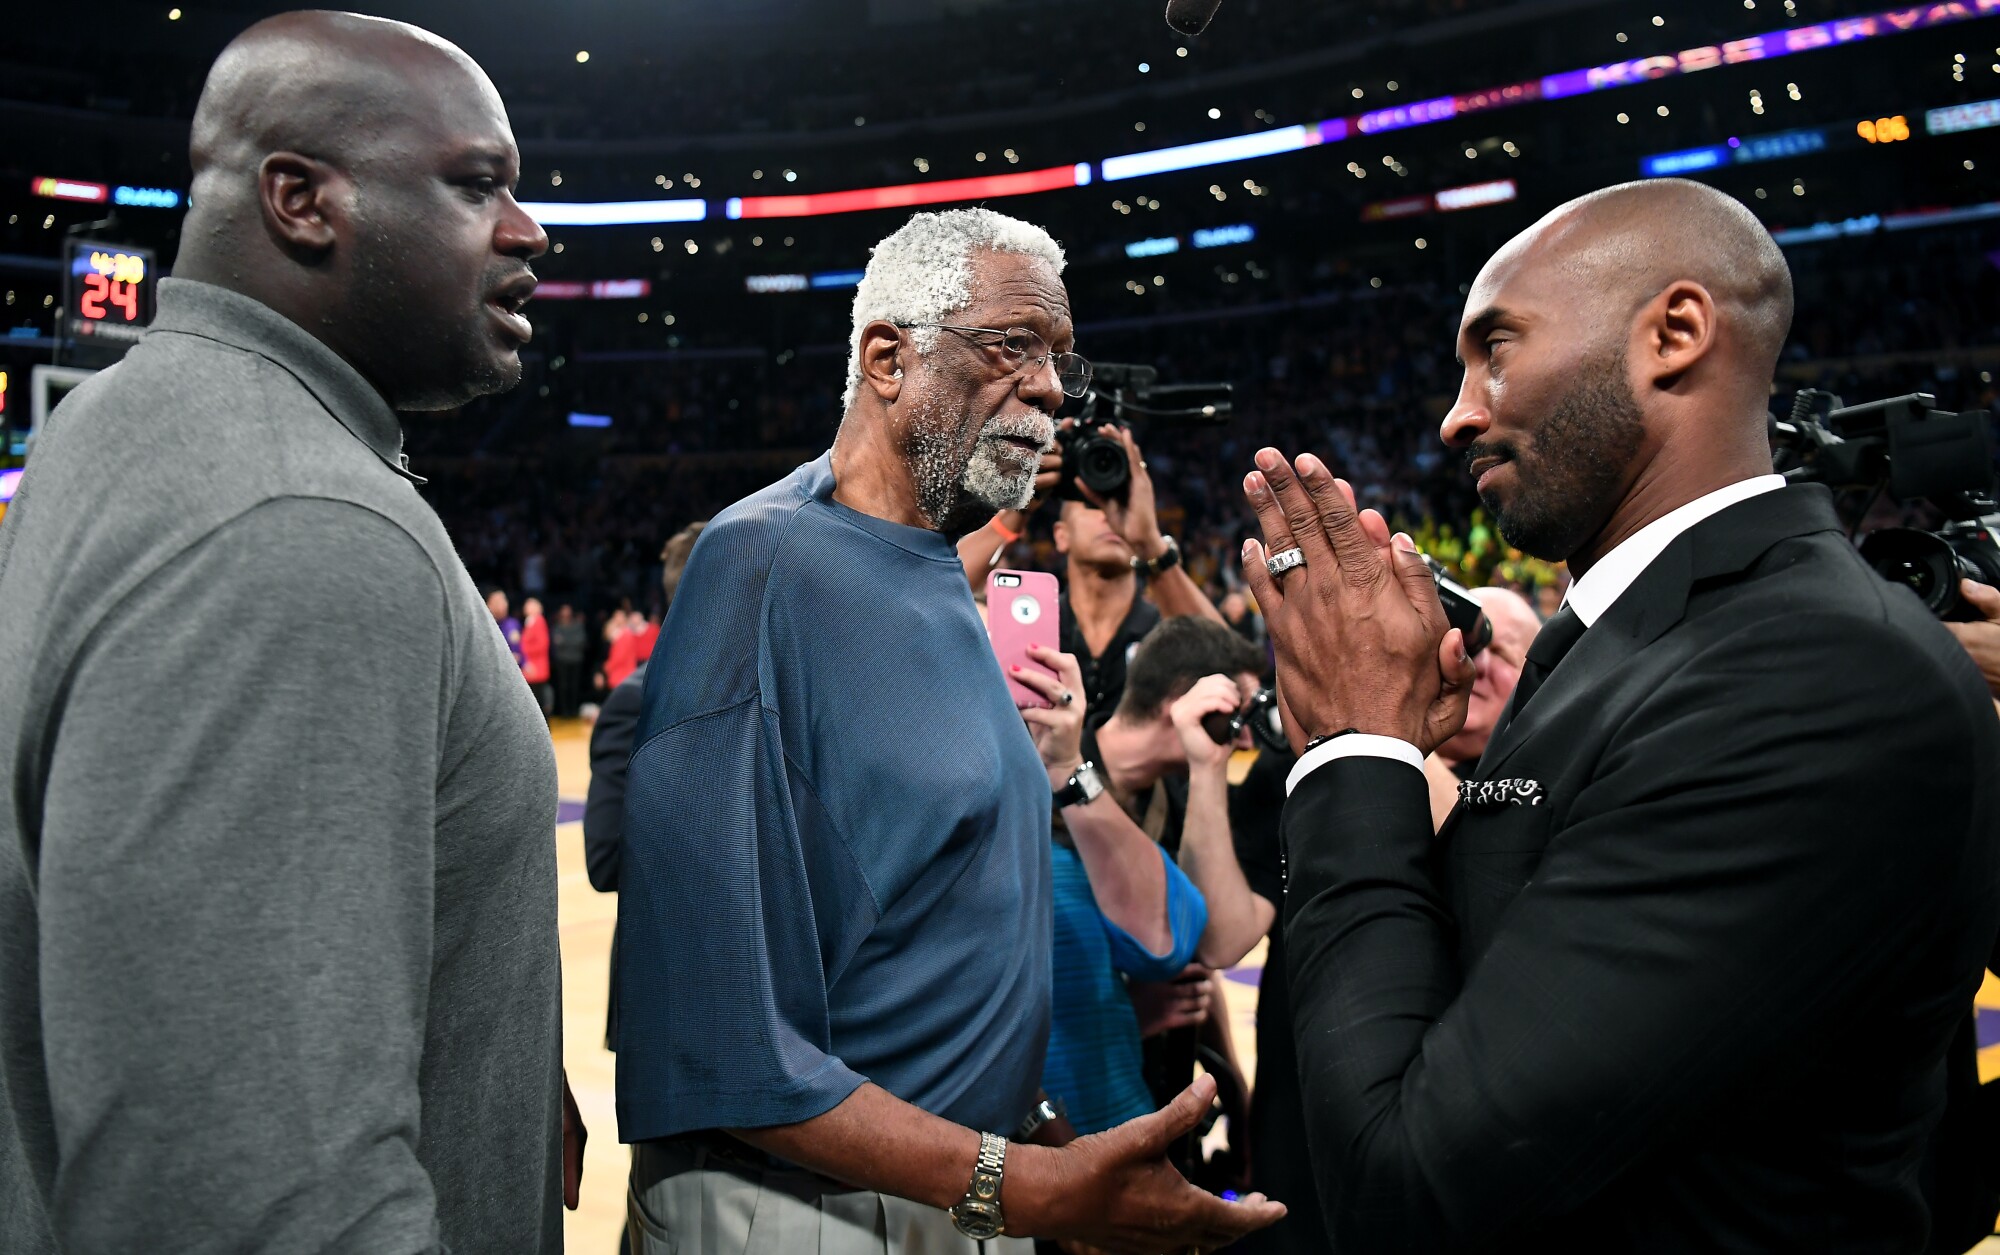 Kobe Bryant, right, pays his respects to Bill Russell during the Lakers legend's jersey retirement ceremony in 2017.